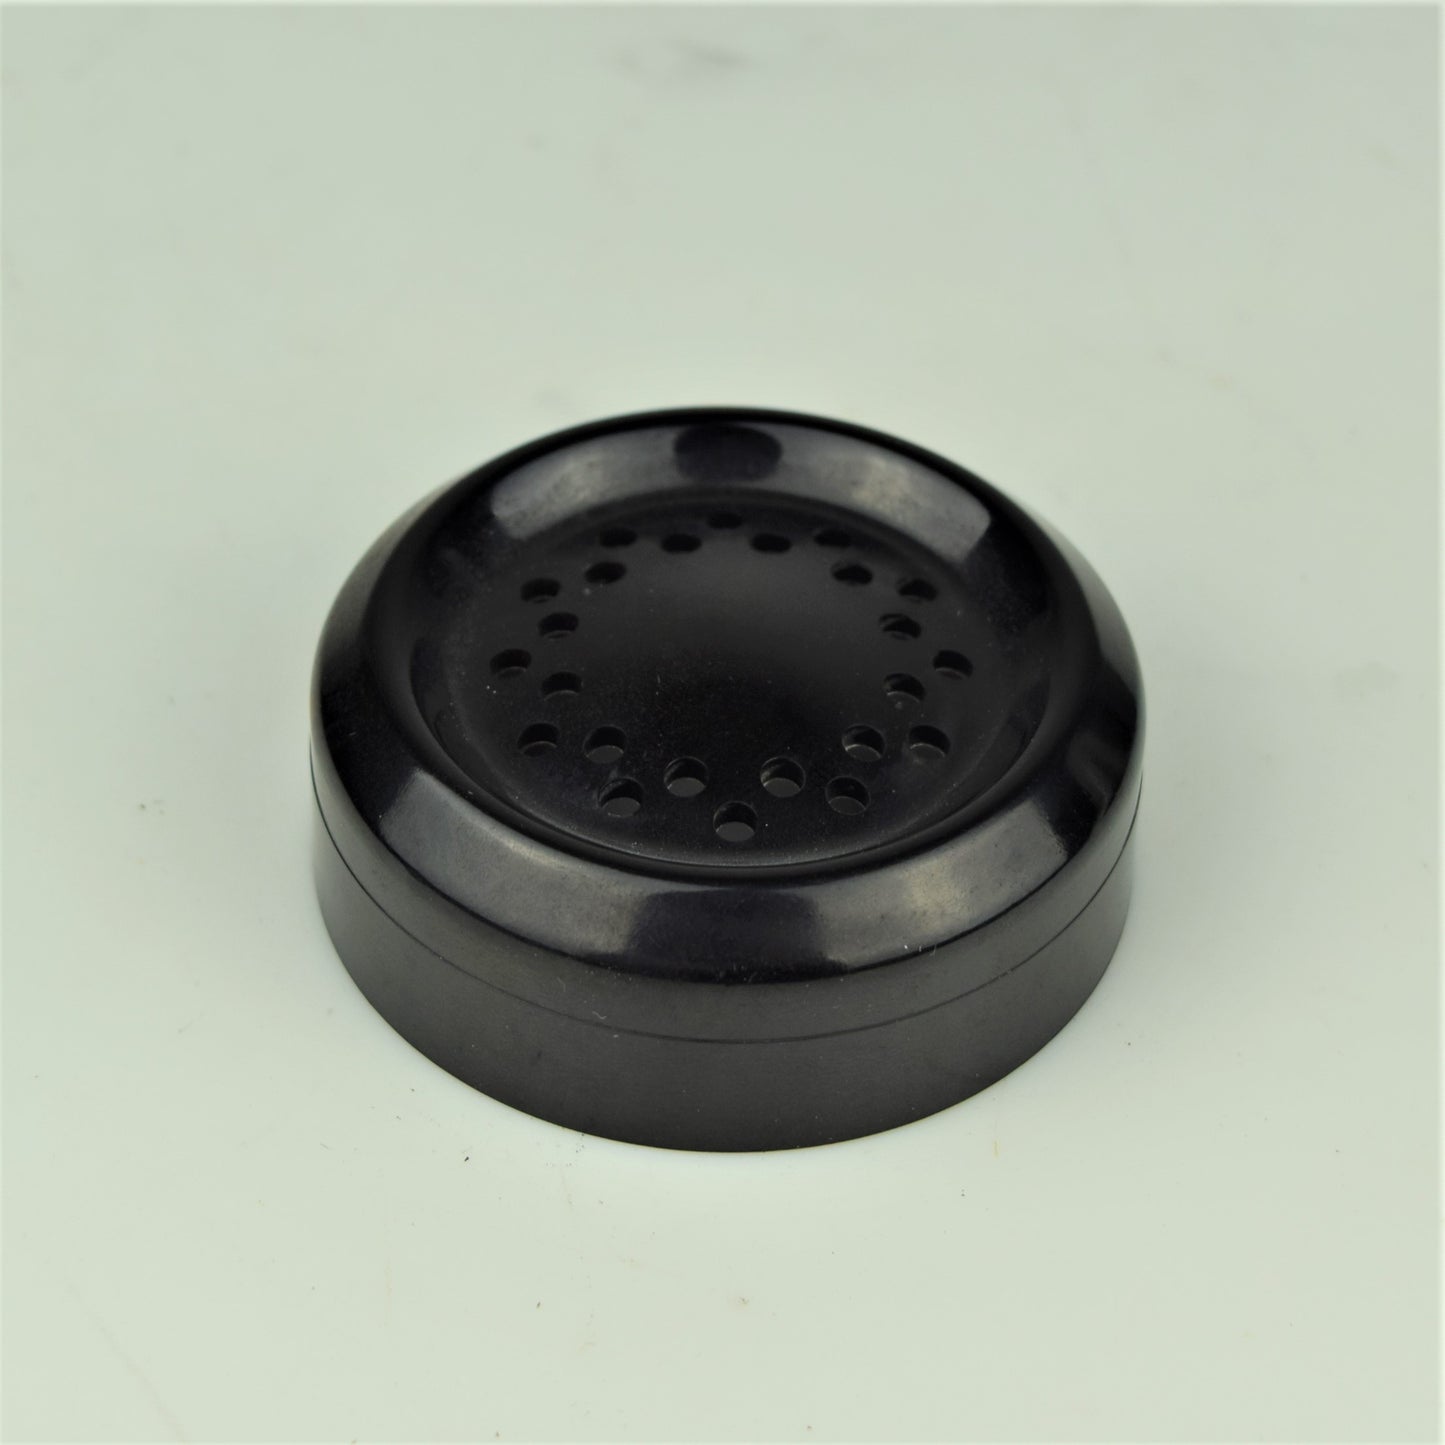 Automatic Electric - Transmitter Cap - Type 41